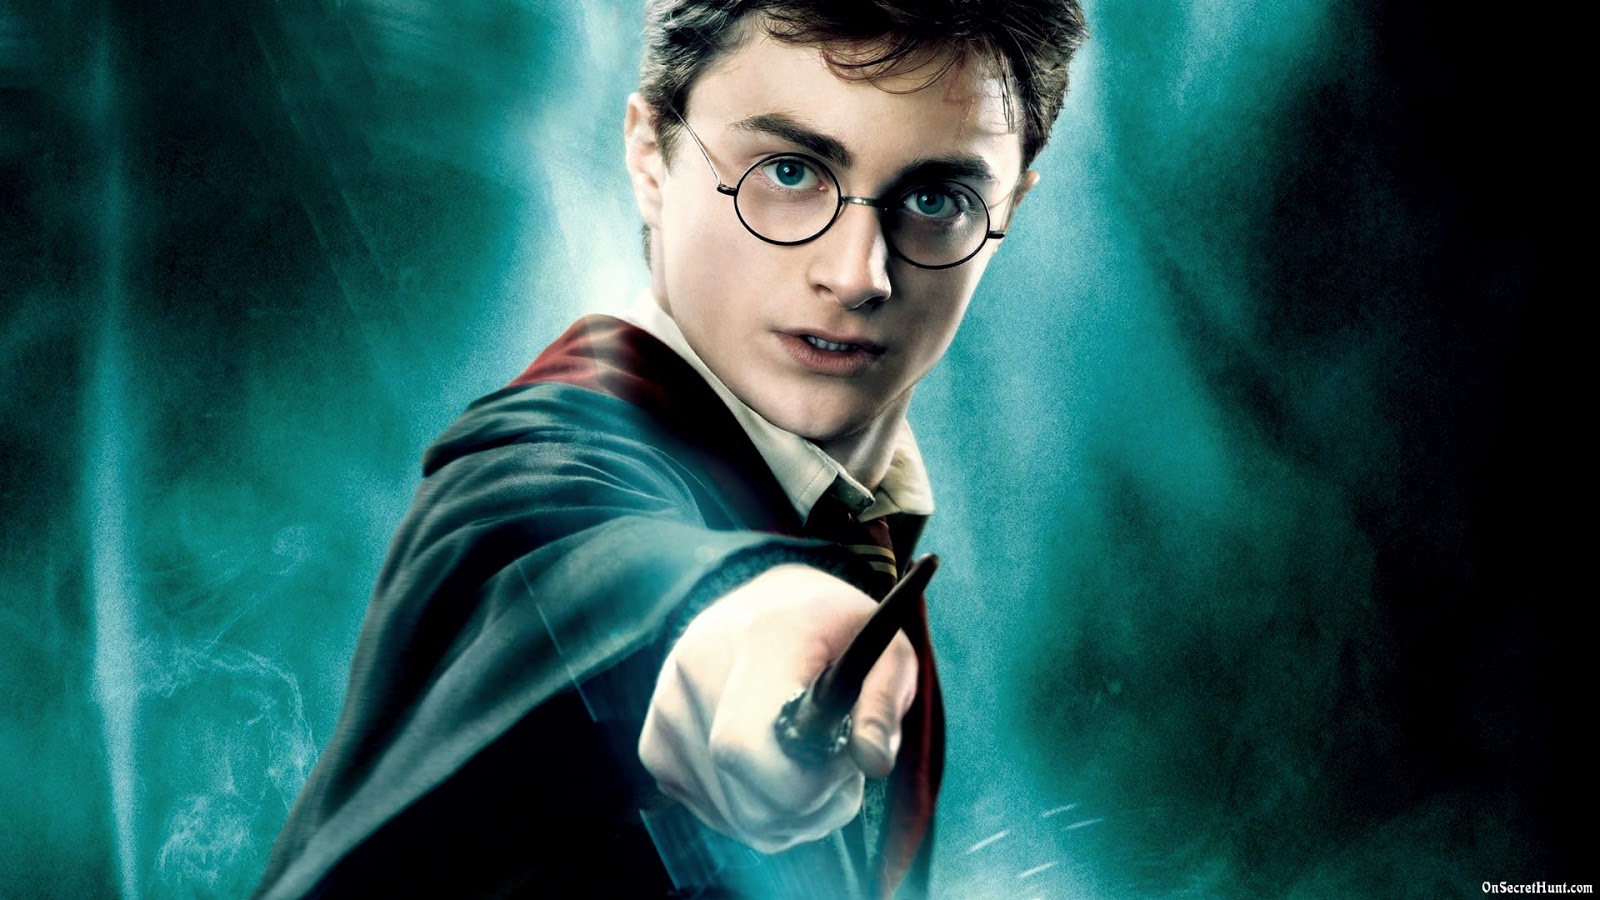 THEREALPOTTER